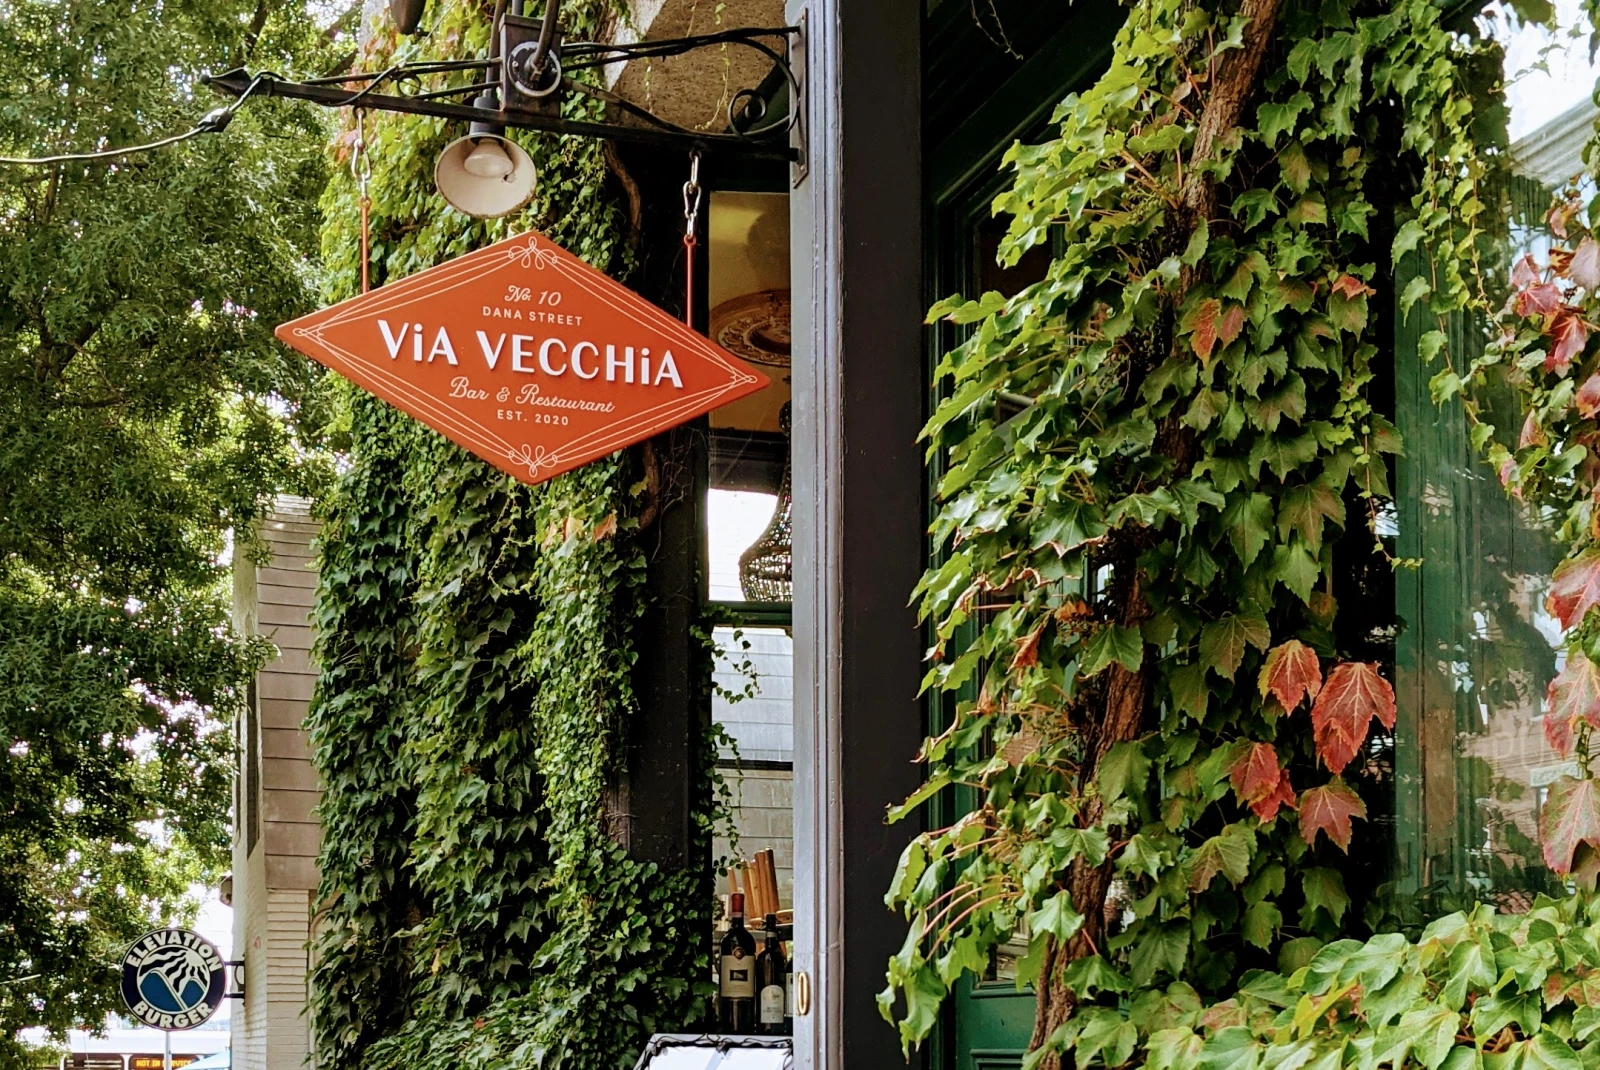 Green vines on side of building with orange sign during daytime